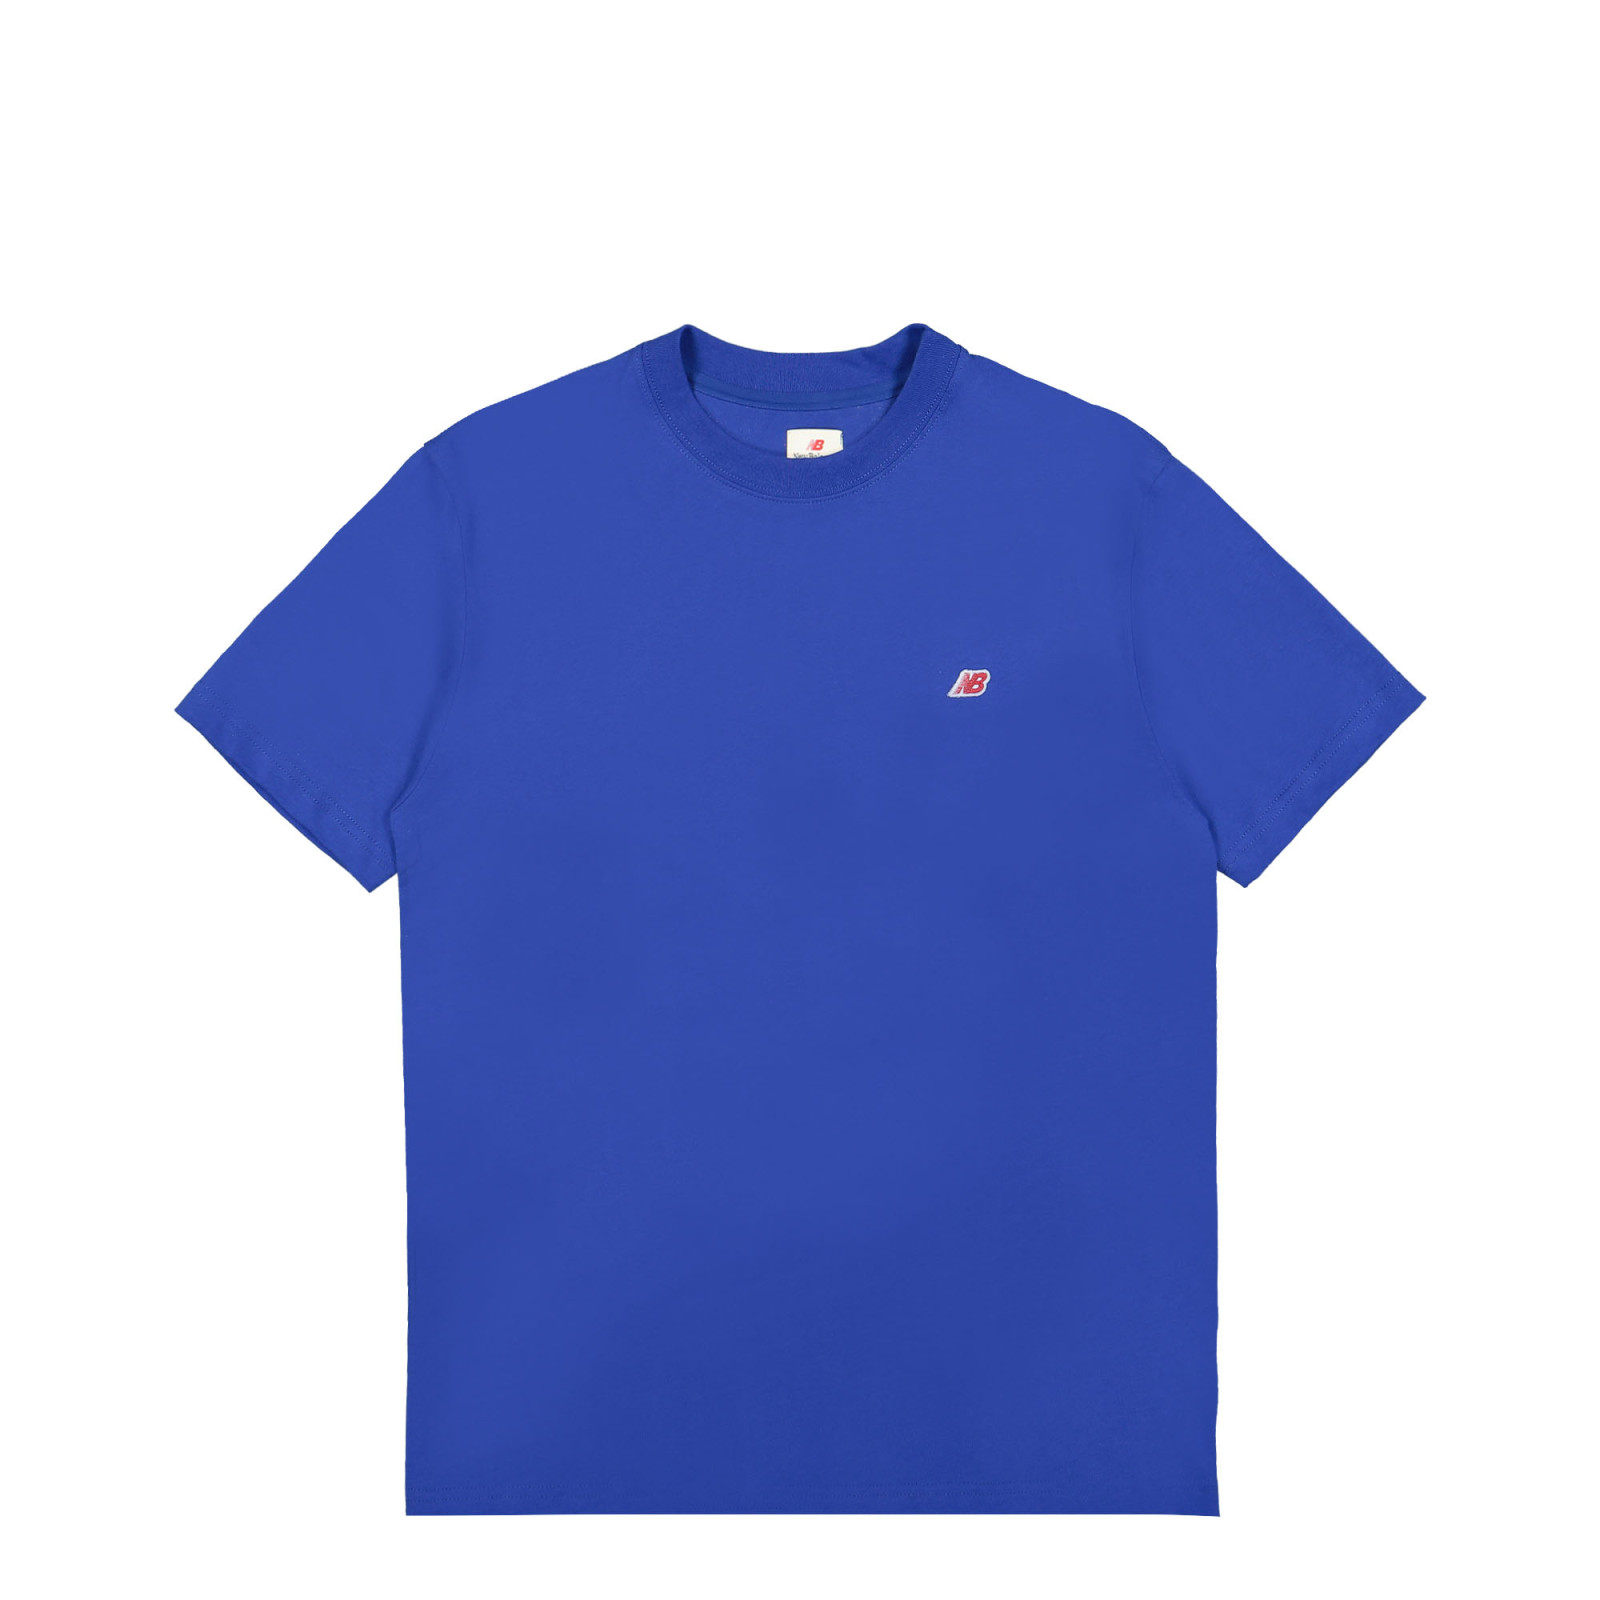 New Balance Made In USA
Core SS Tee
Blue